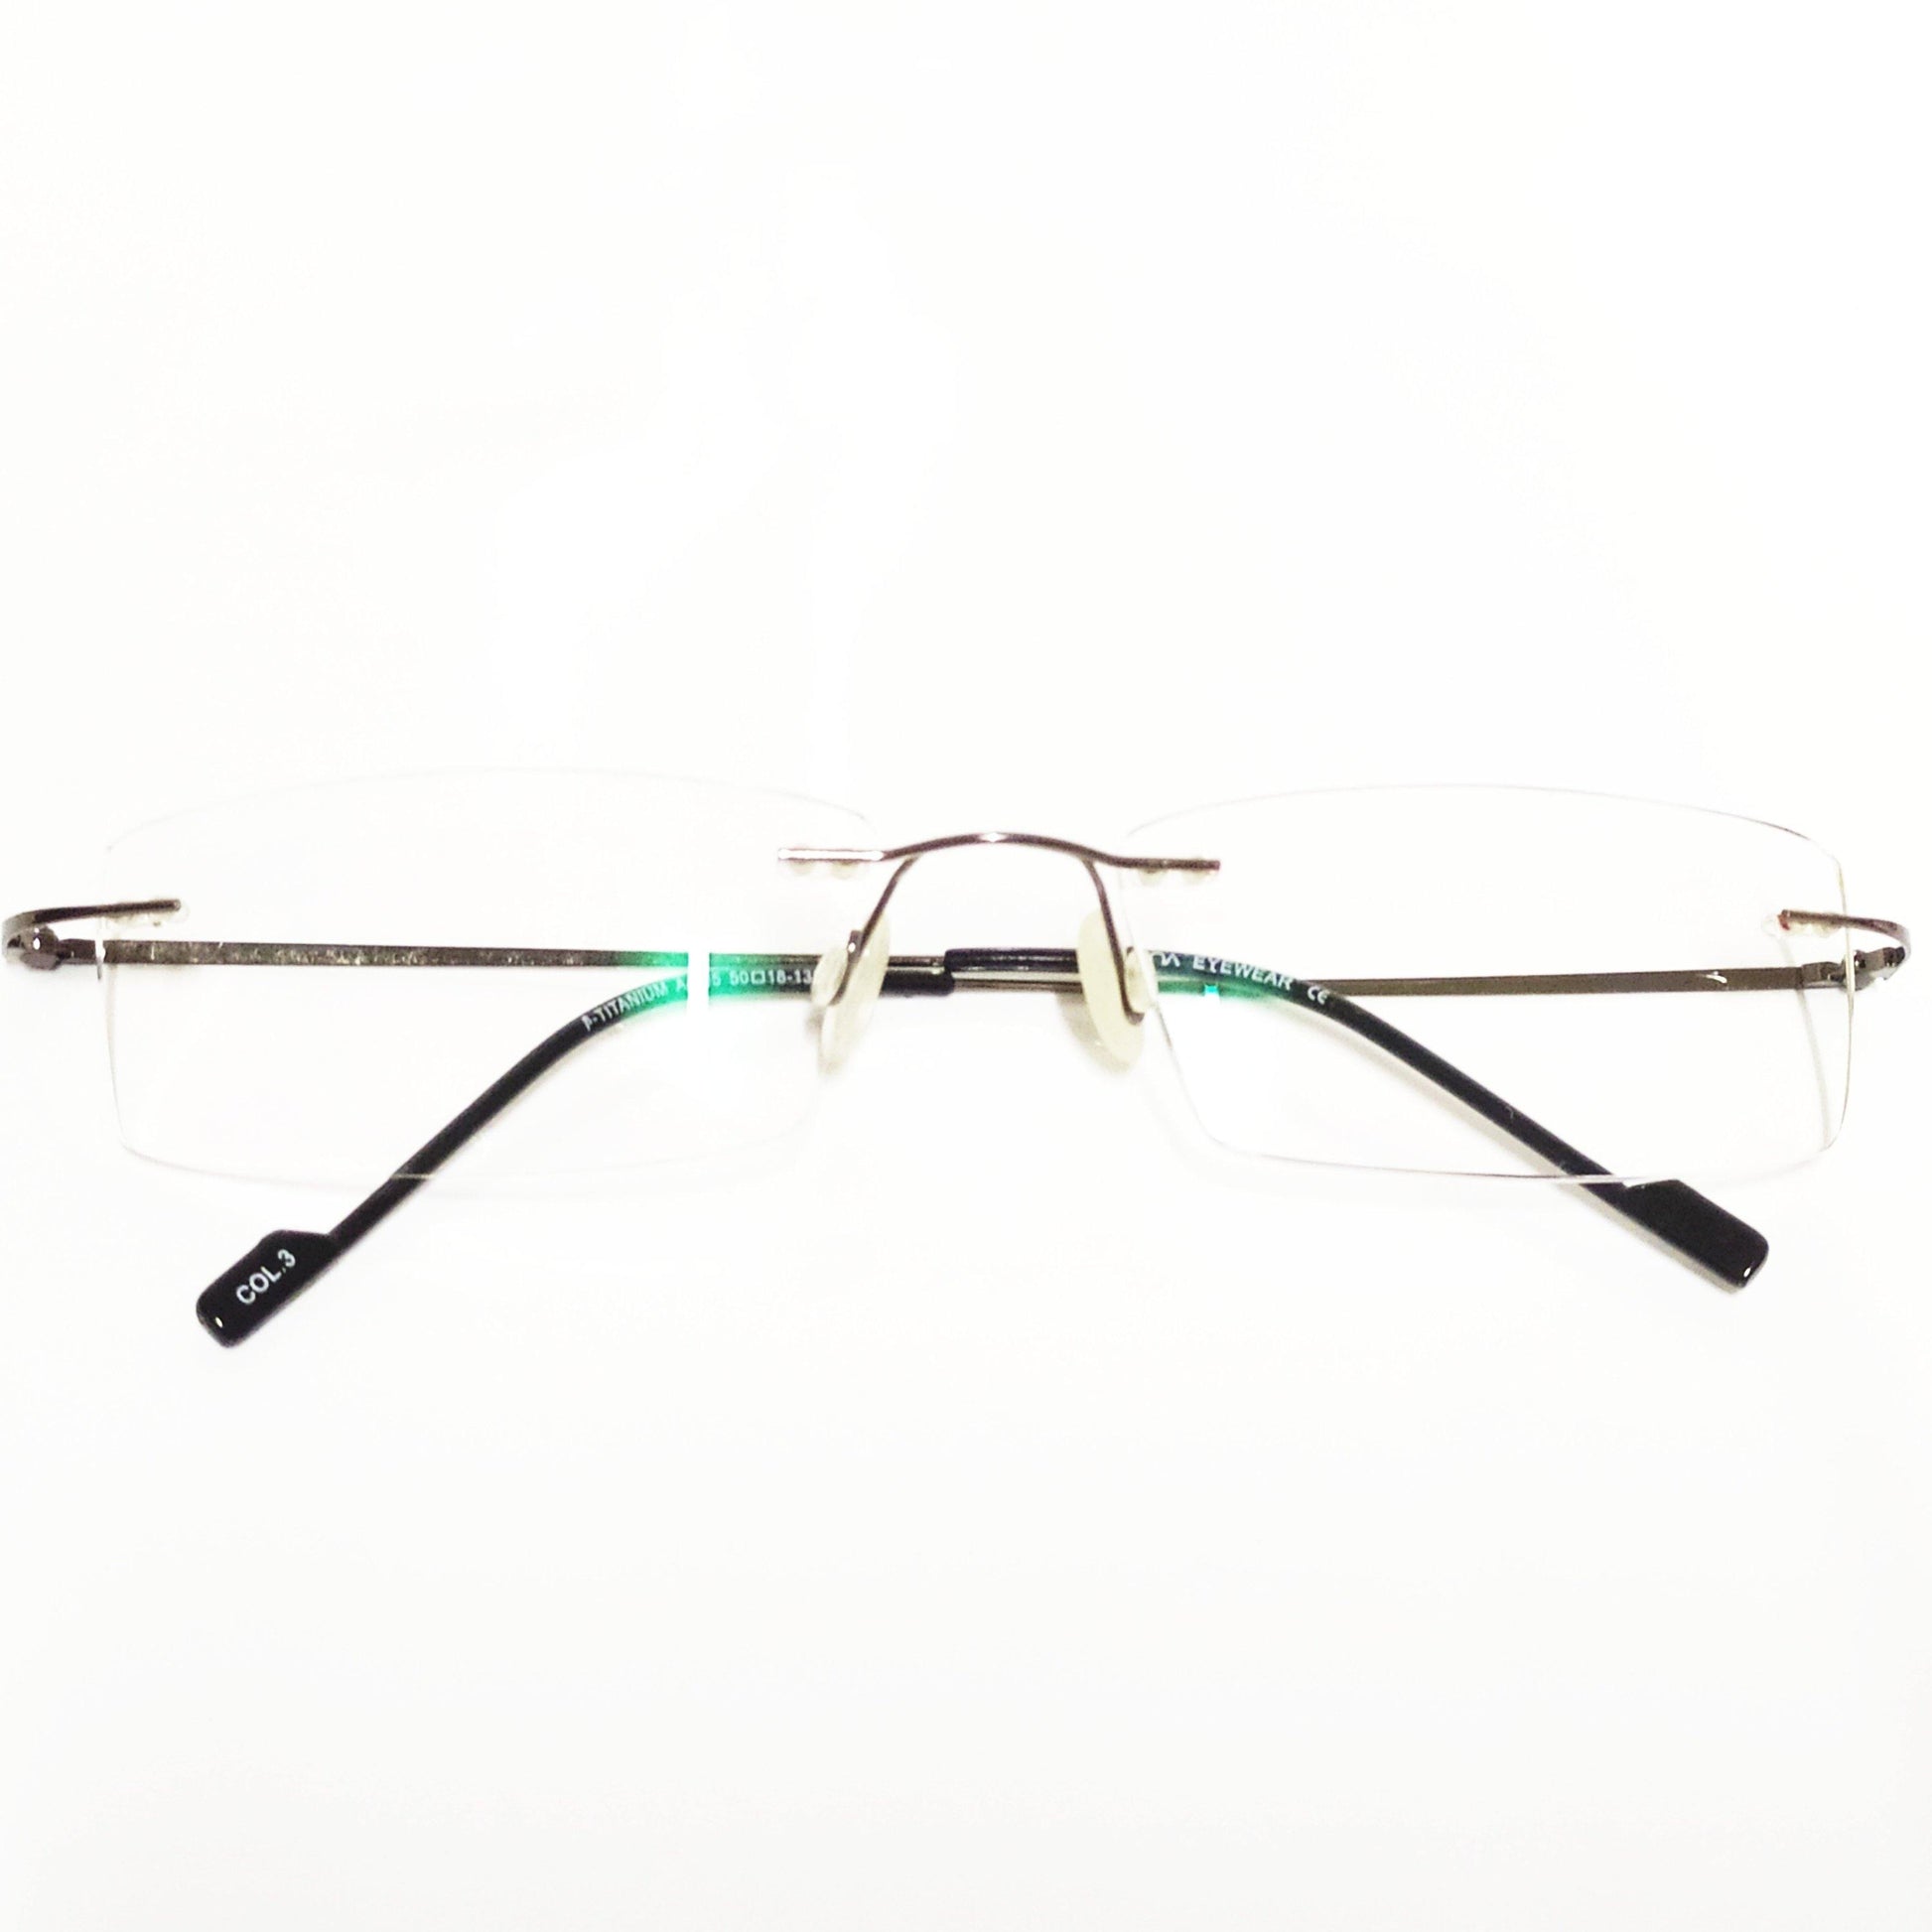 Buy Grey Rimless Computer Glasses with Anti Glare Coating Lens - Glasses India Online in India